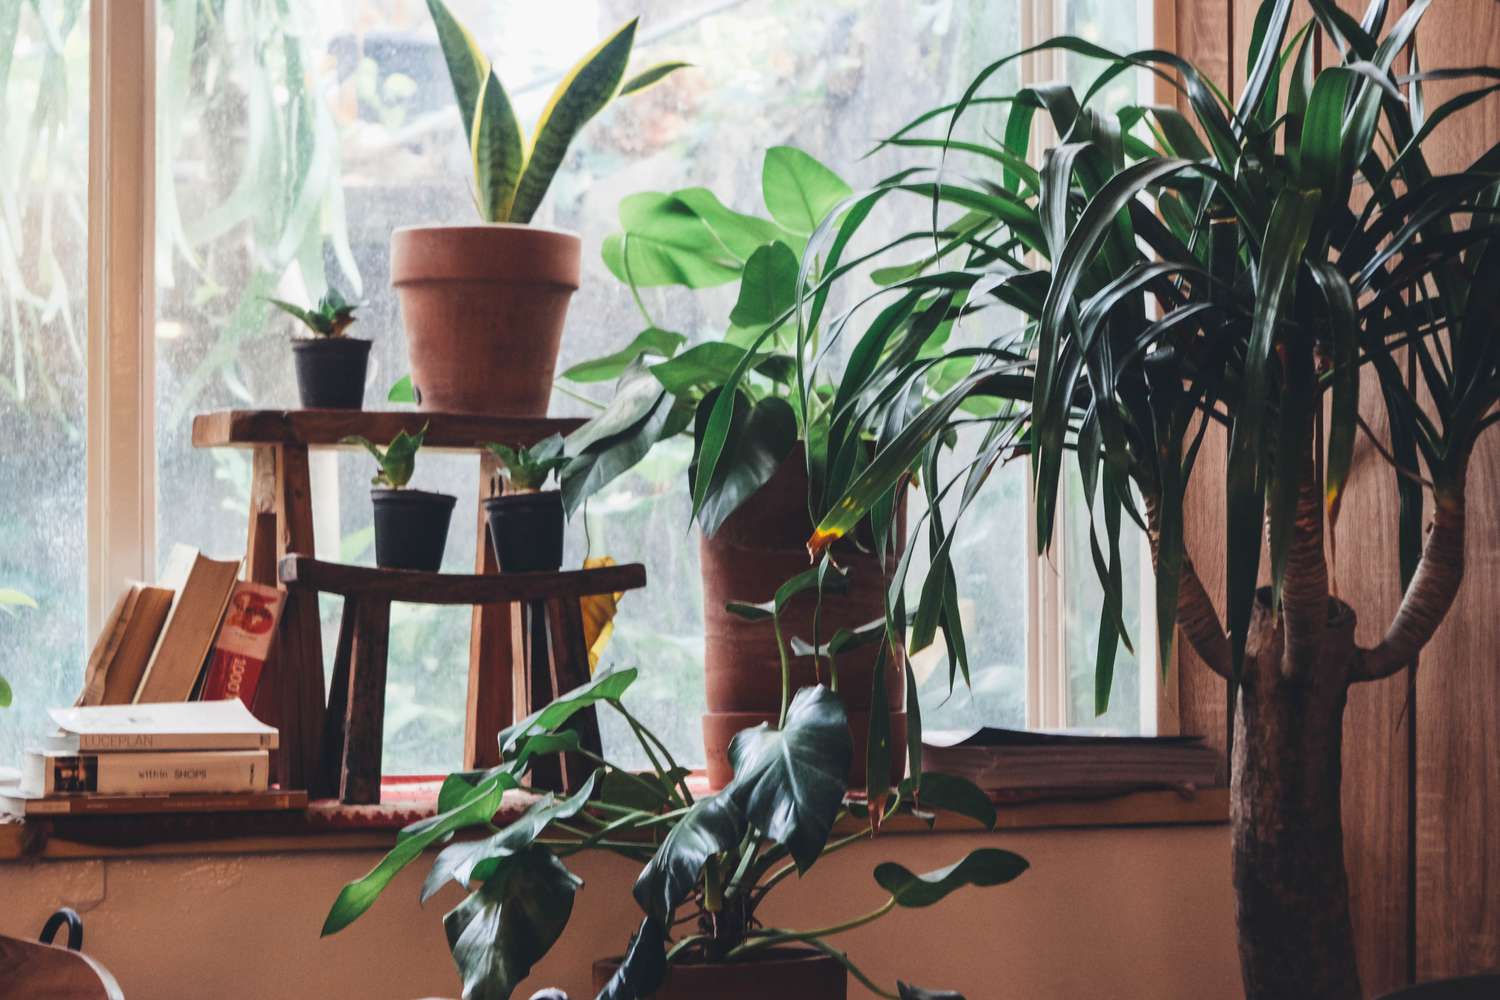 potted green plants inside a window brings in life energy in feng shui philosophy